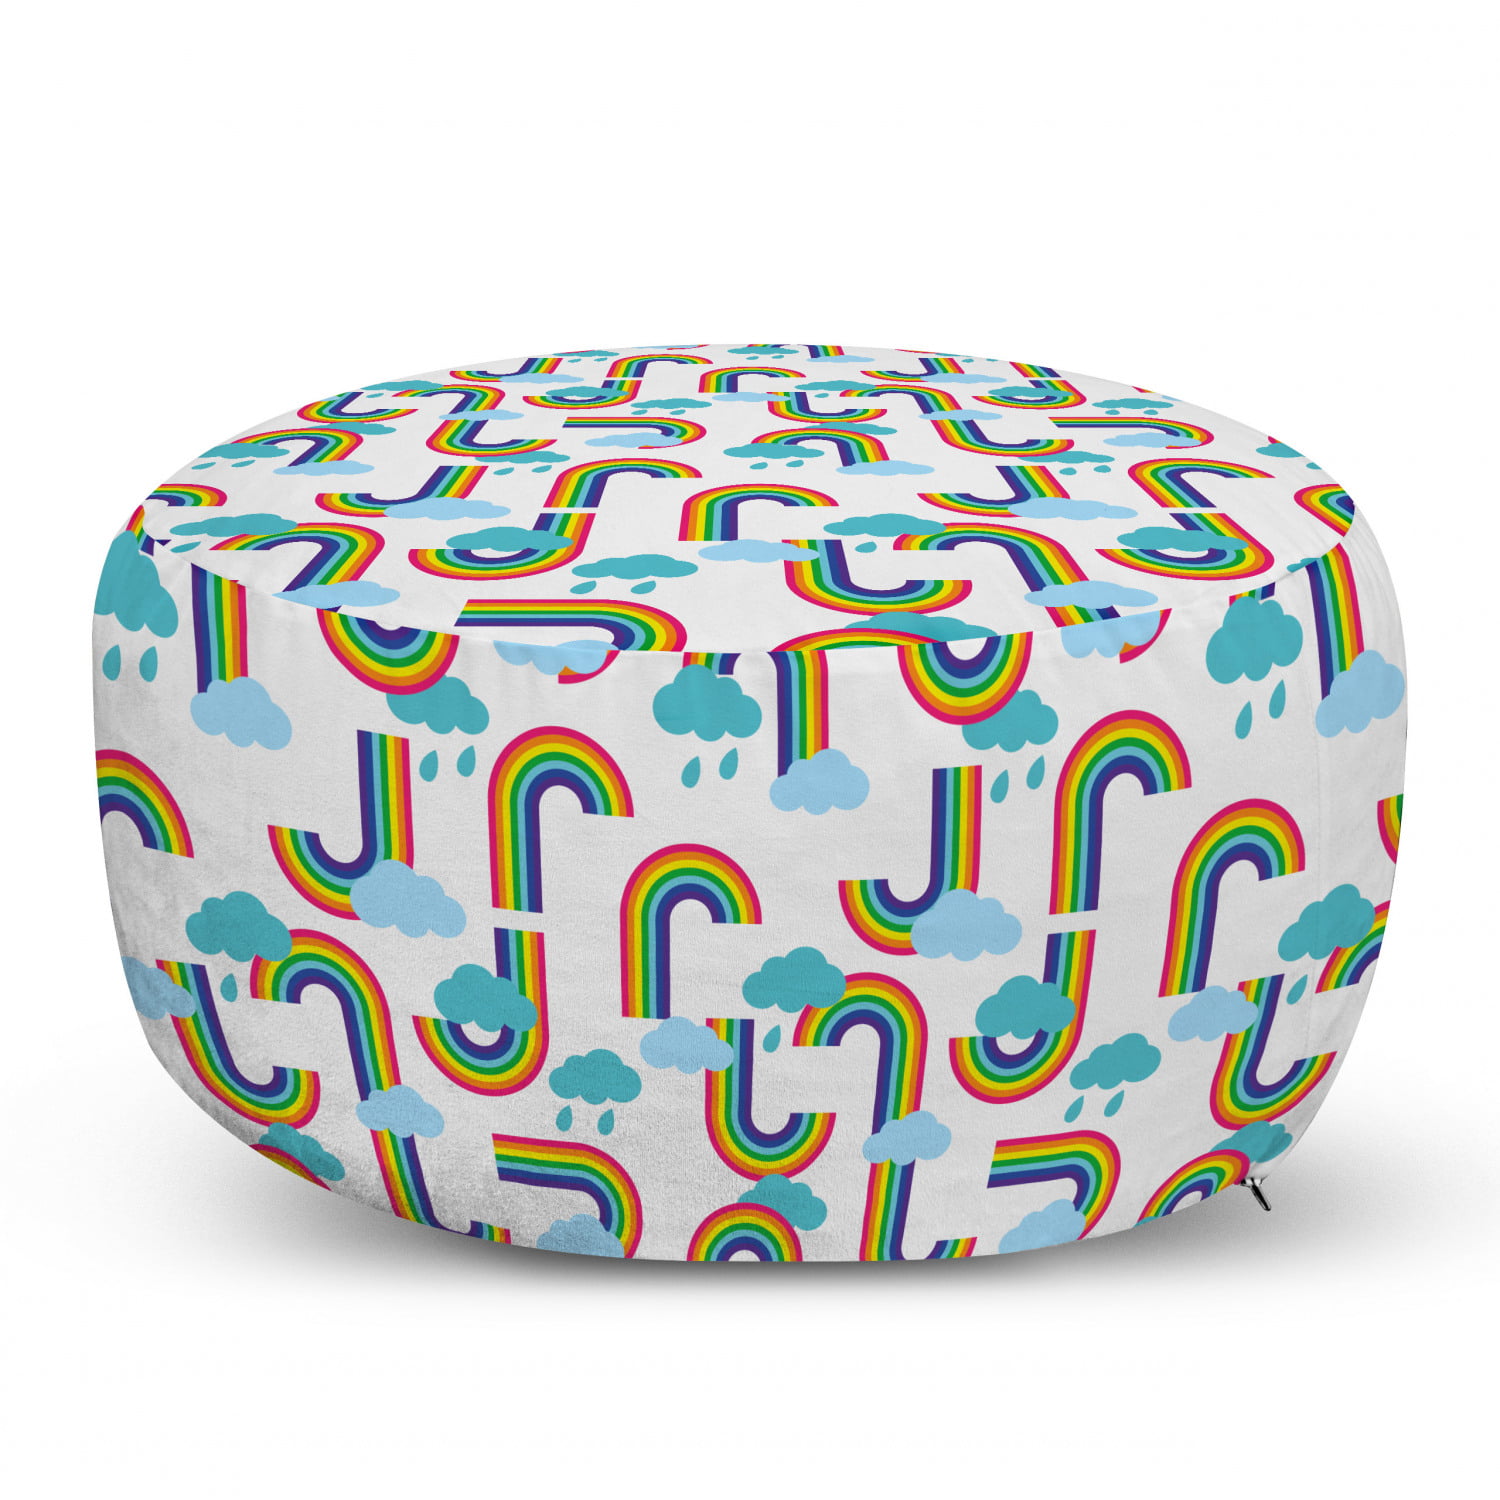 Multicolor Cartoon Hip Hop Boys and Girls in Colorful Underground Fashion Clothes 25 Ambesonne Hip Hop Rectangle Pouf Under Desk Foot Stool for Living Room Office Ottoman with Cover